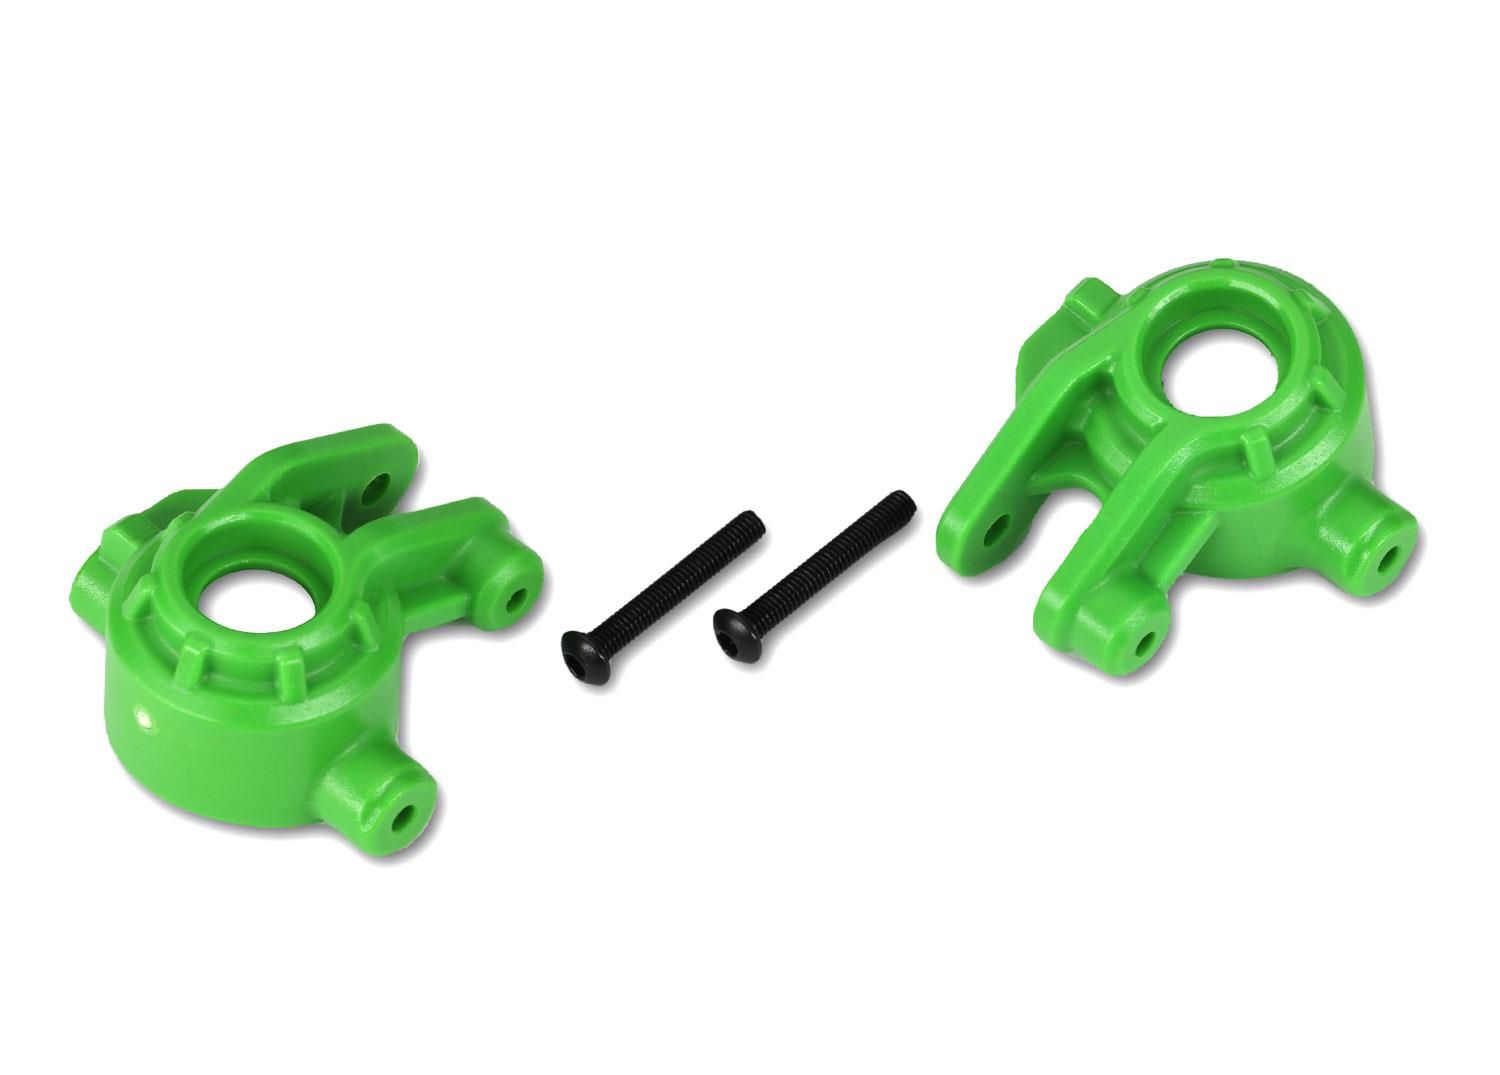 Traxxas - Steering Blocks Left/Right (for use with #9080 upgrade kit) - Green (TRX-9037G)